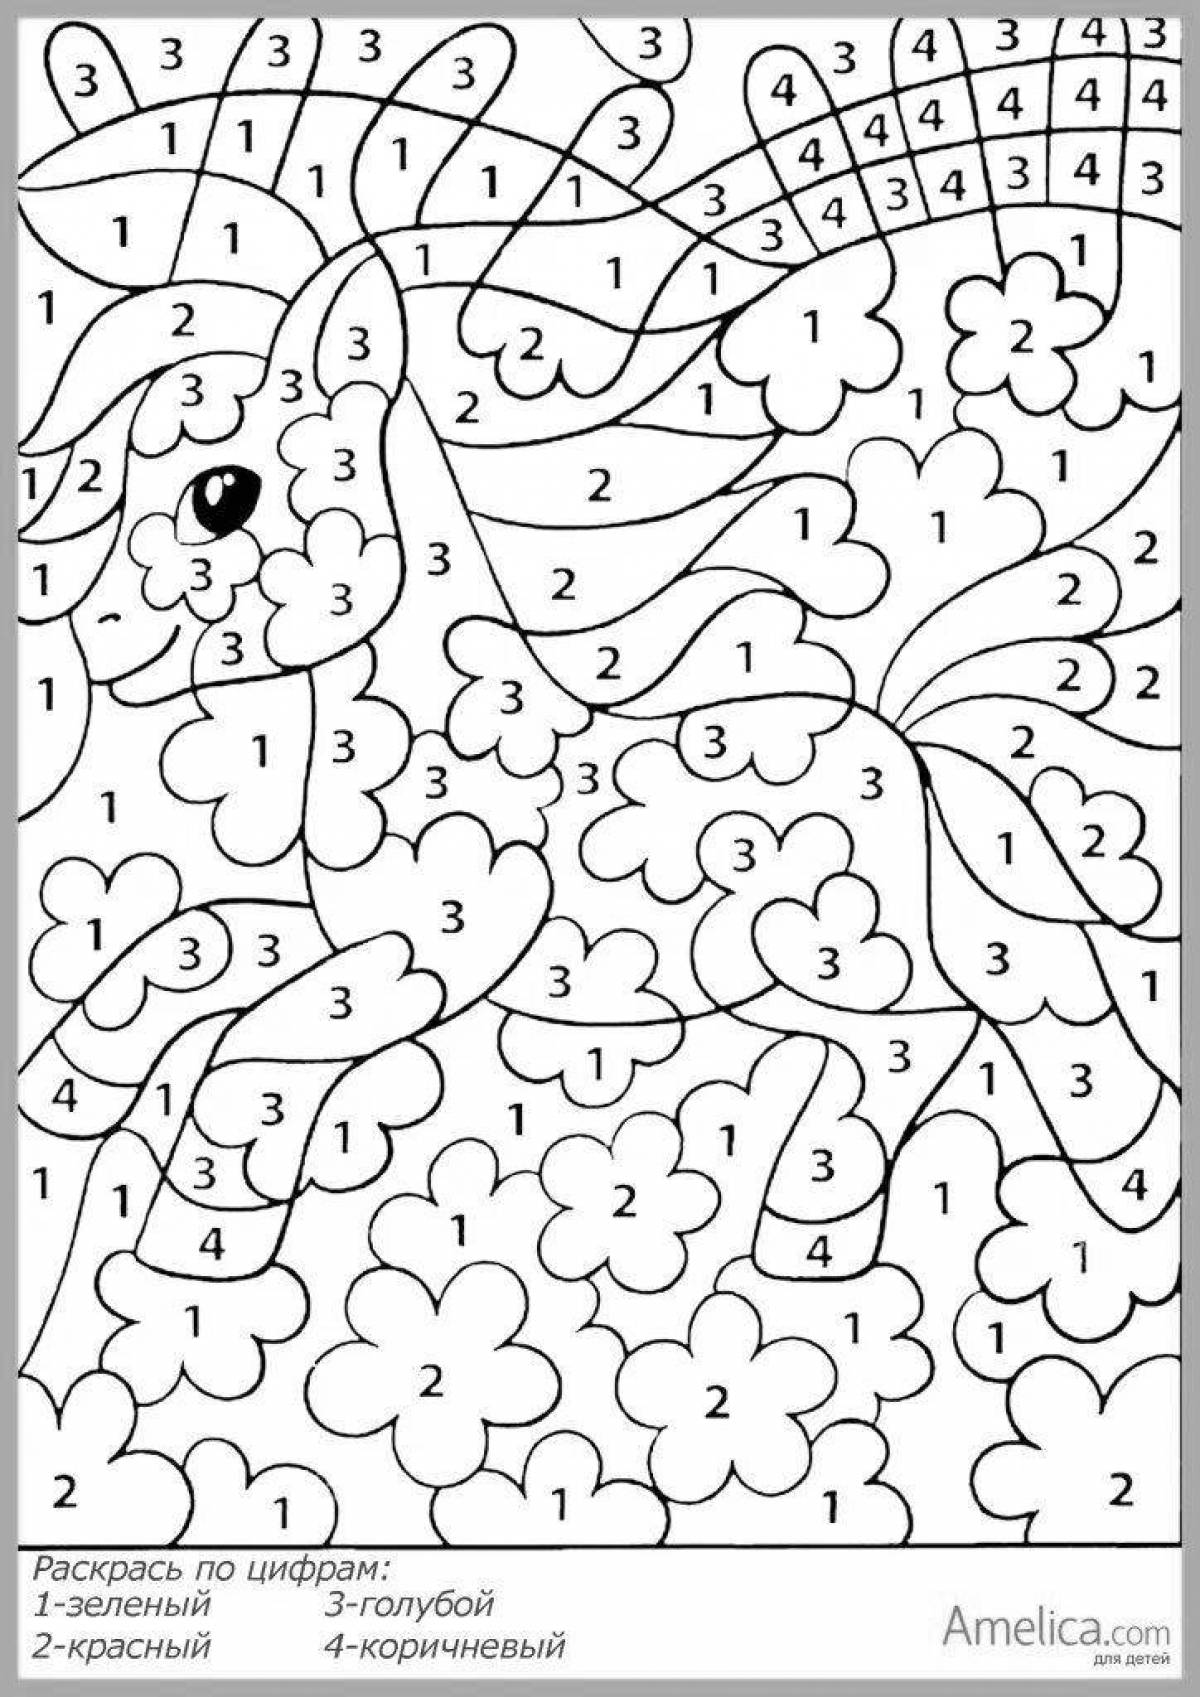 Fun coloring book for 6-7 year olds